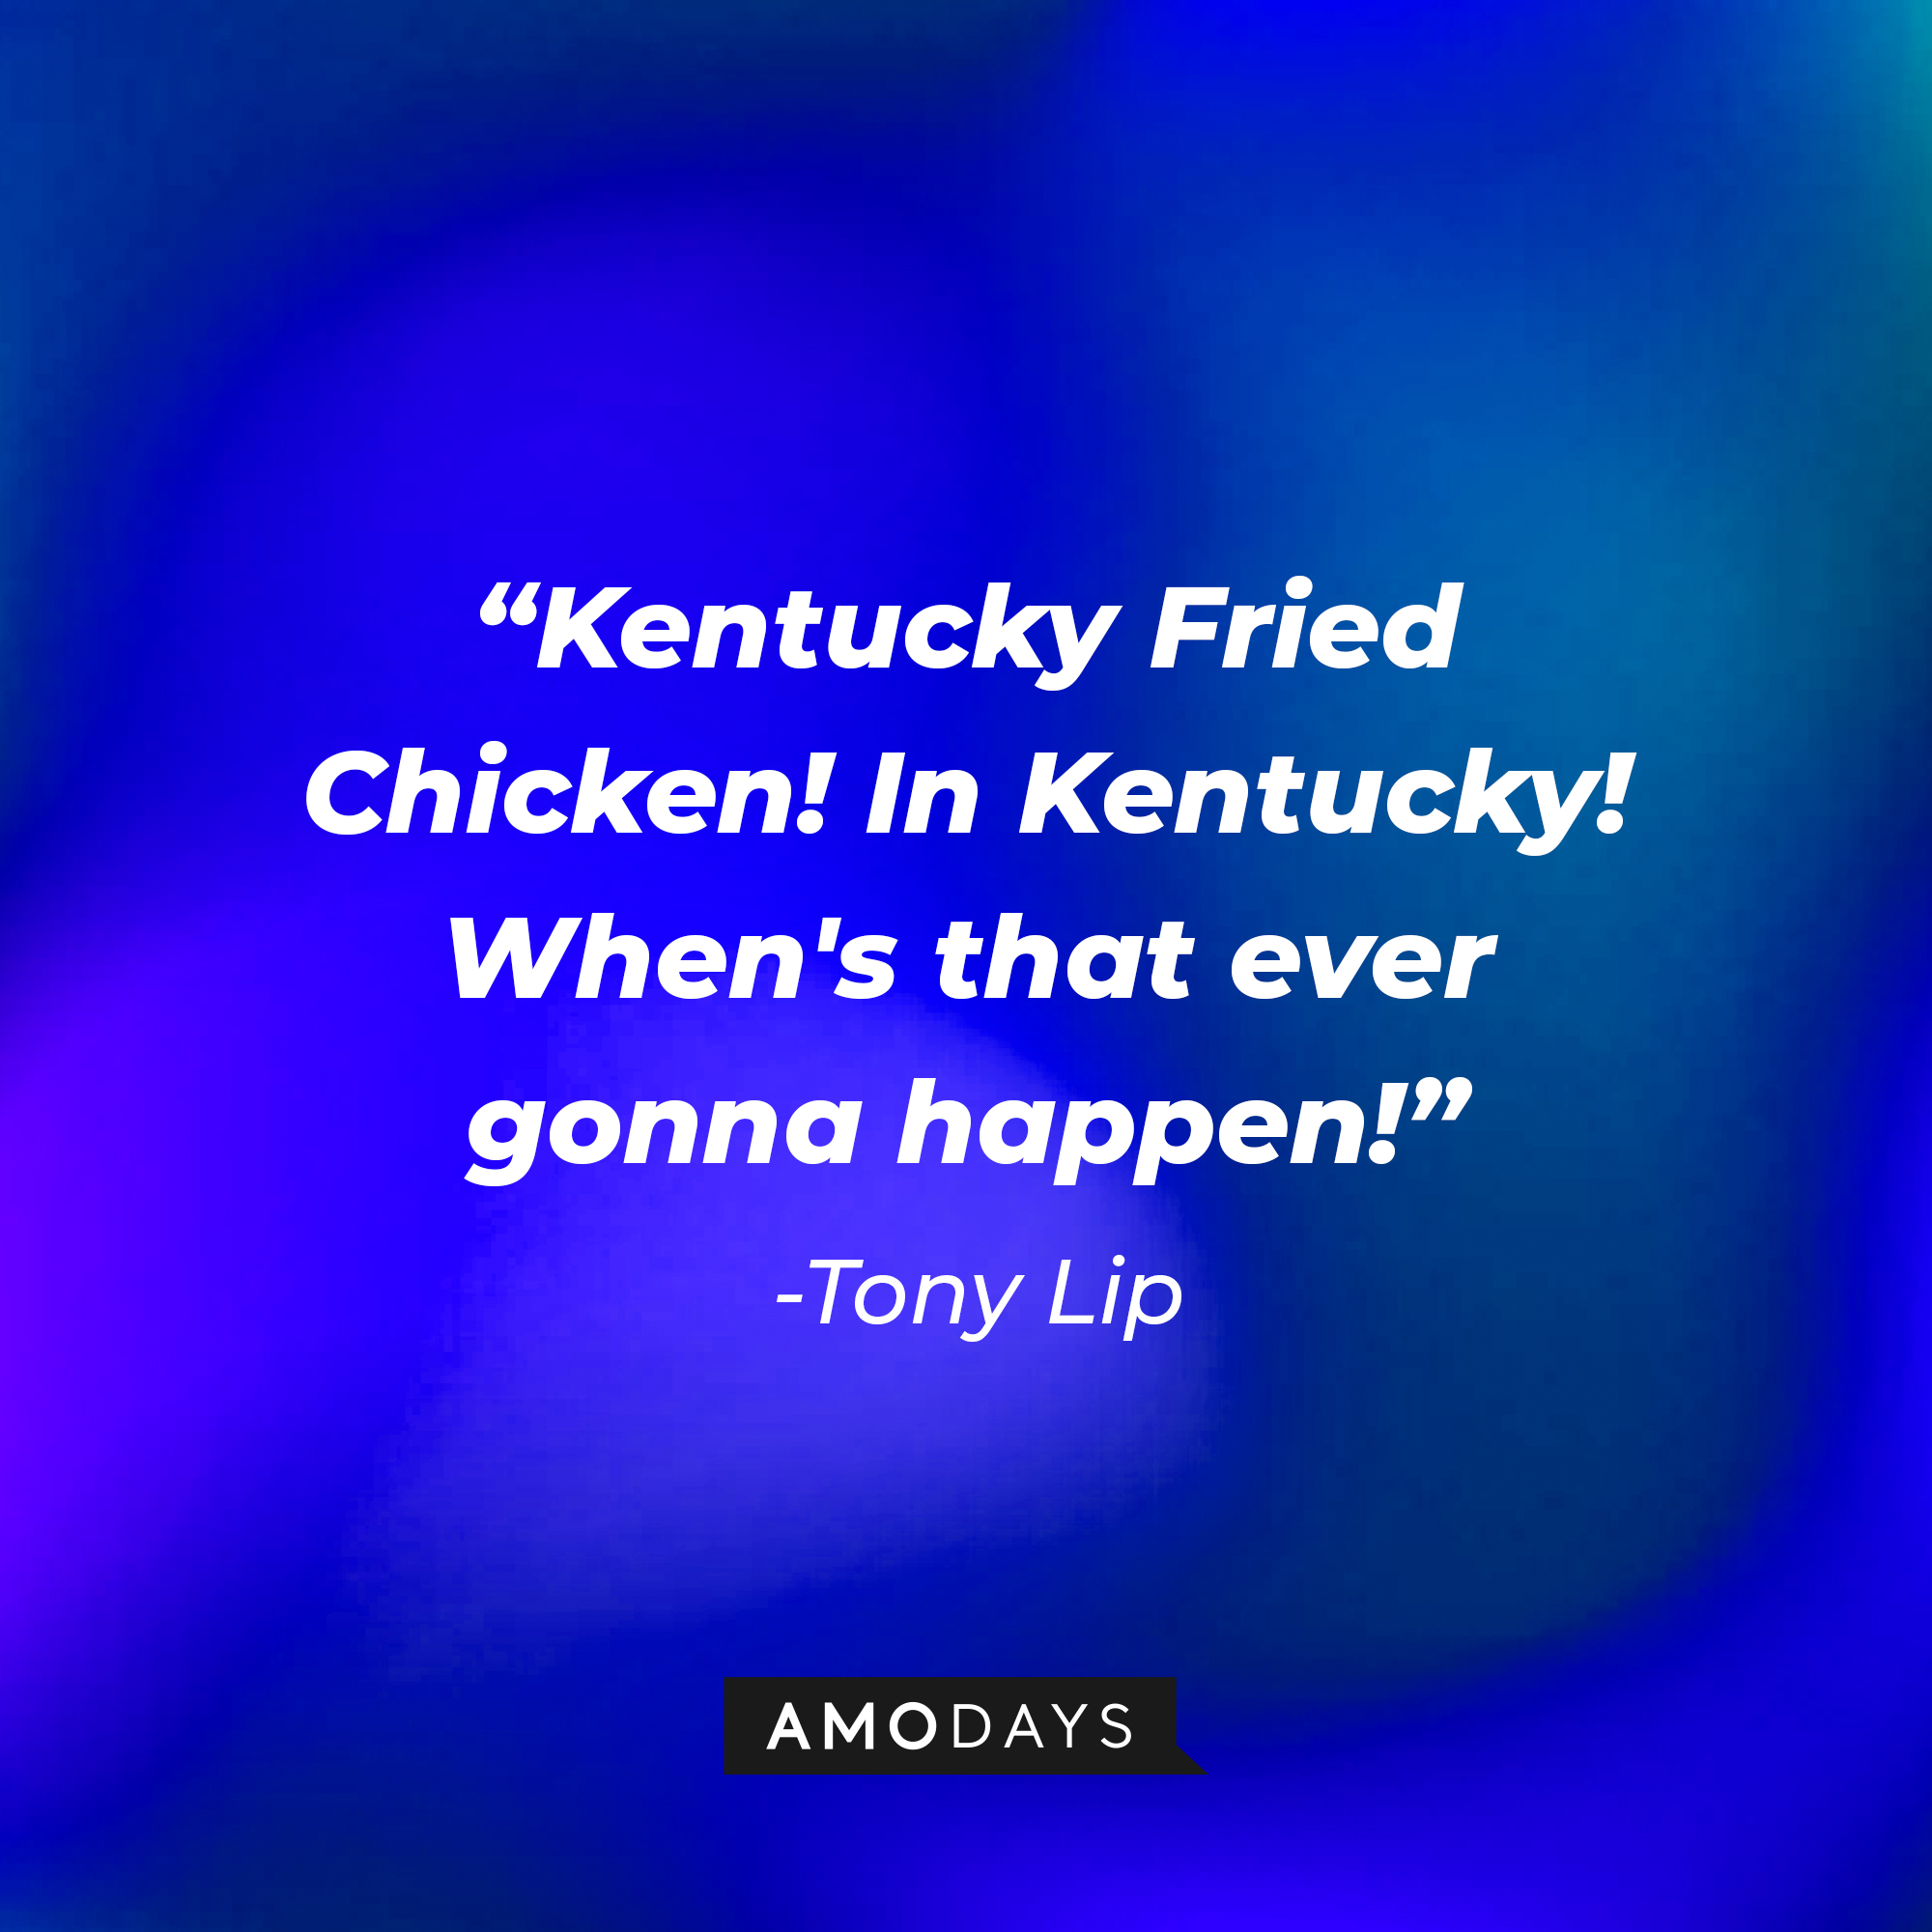 Tony Lip's quote: “Kentucky Fried Chicken! In Kentucky! When's that ever gonna happen!” | Source: Amodays